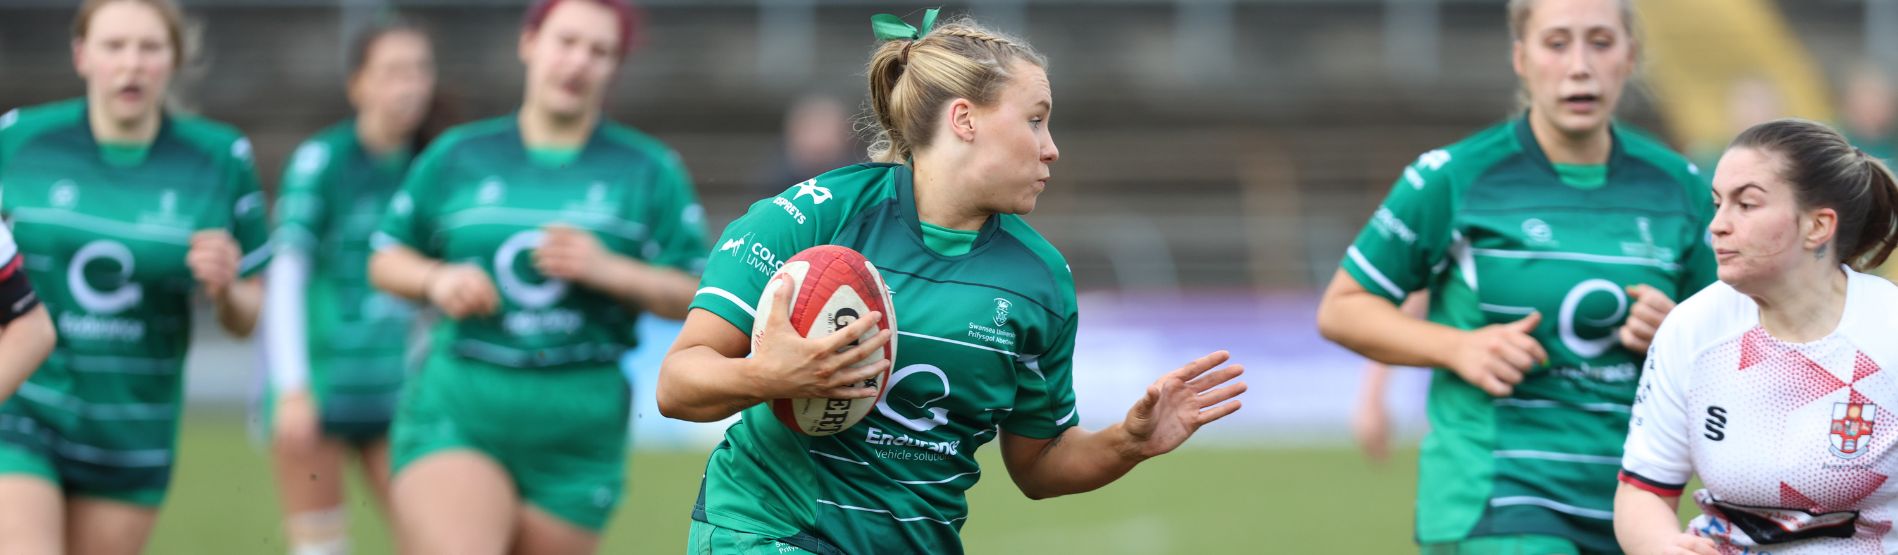 Female rugby player during a fixture 